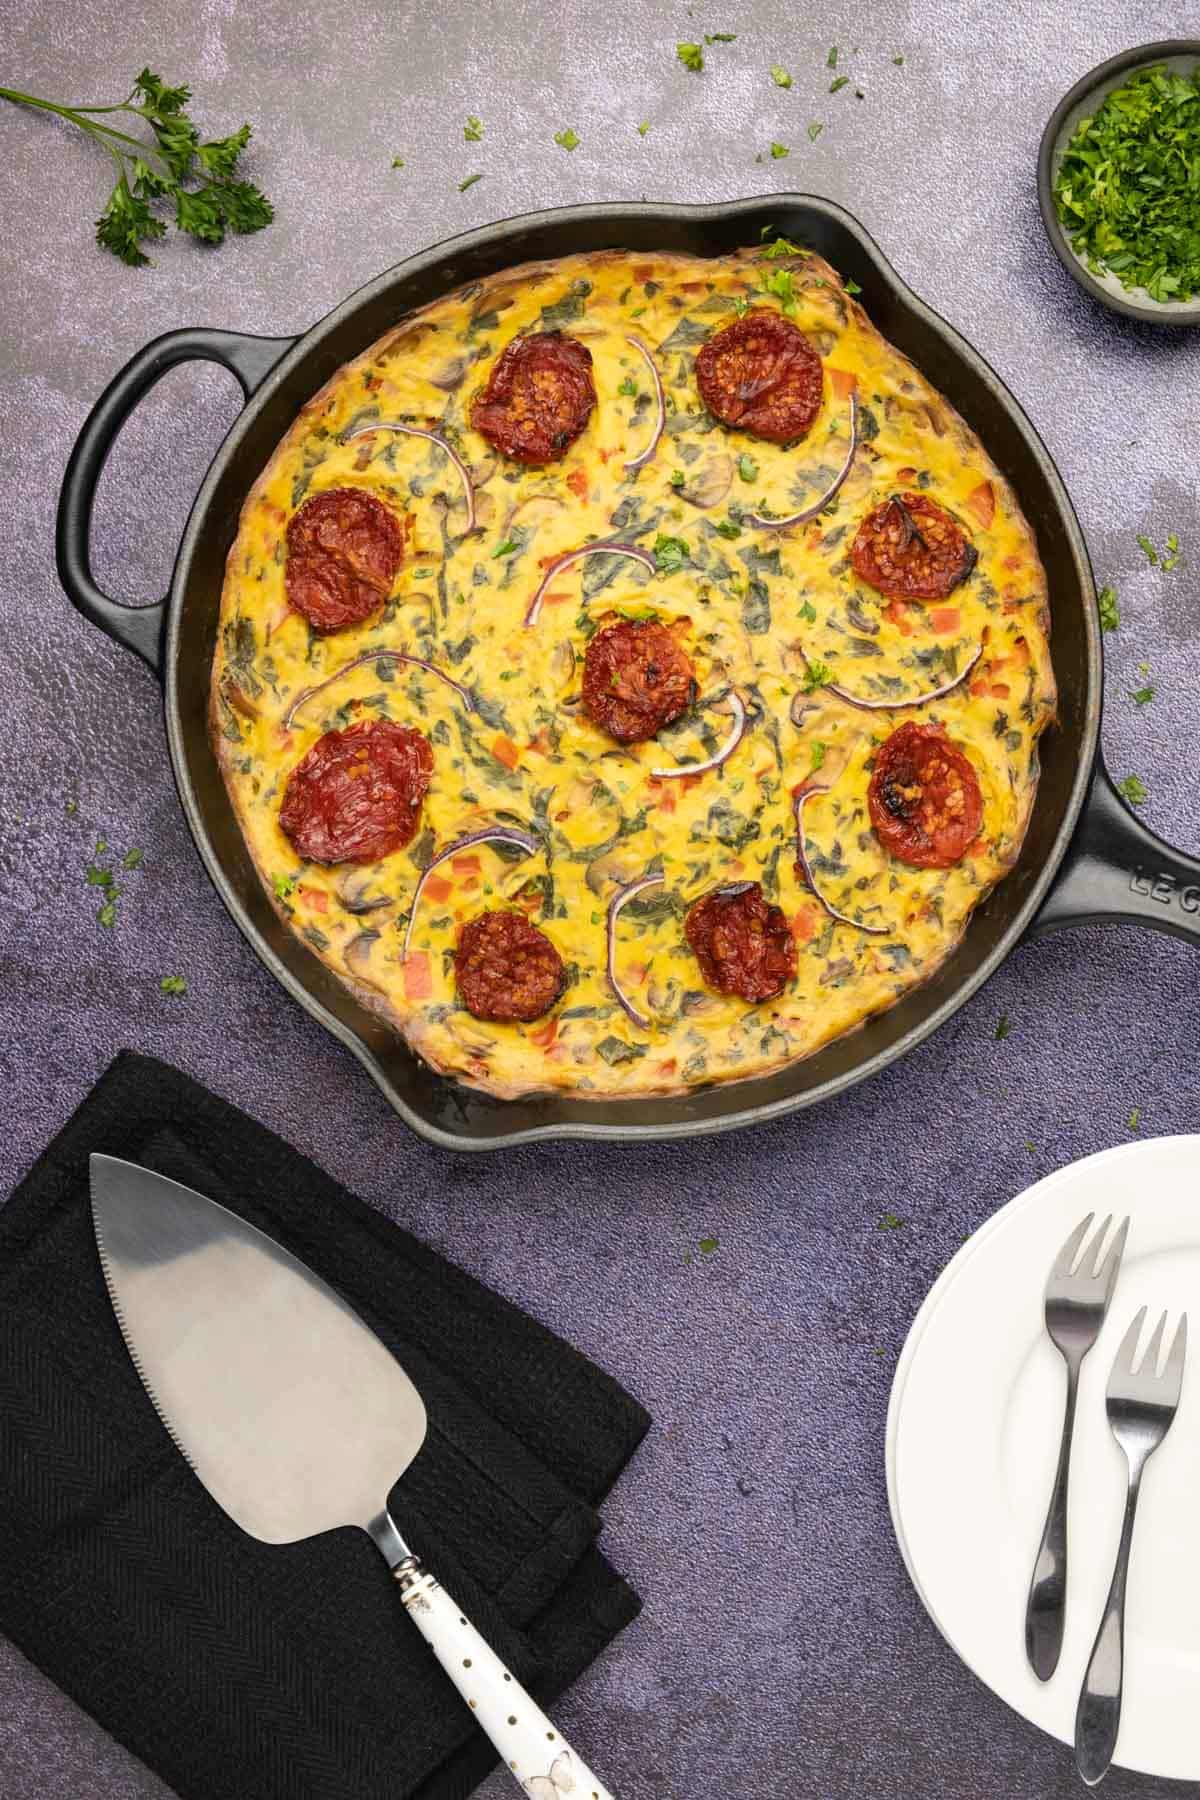 Baked vegan frittata in a cast iron skillet.